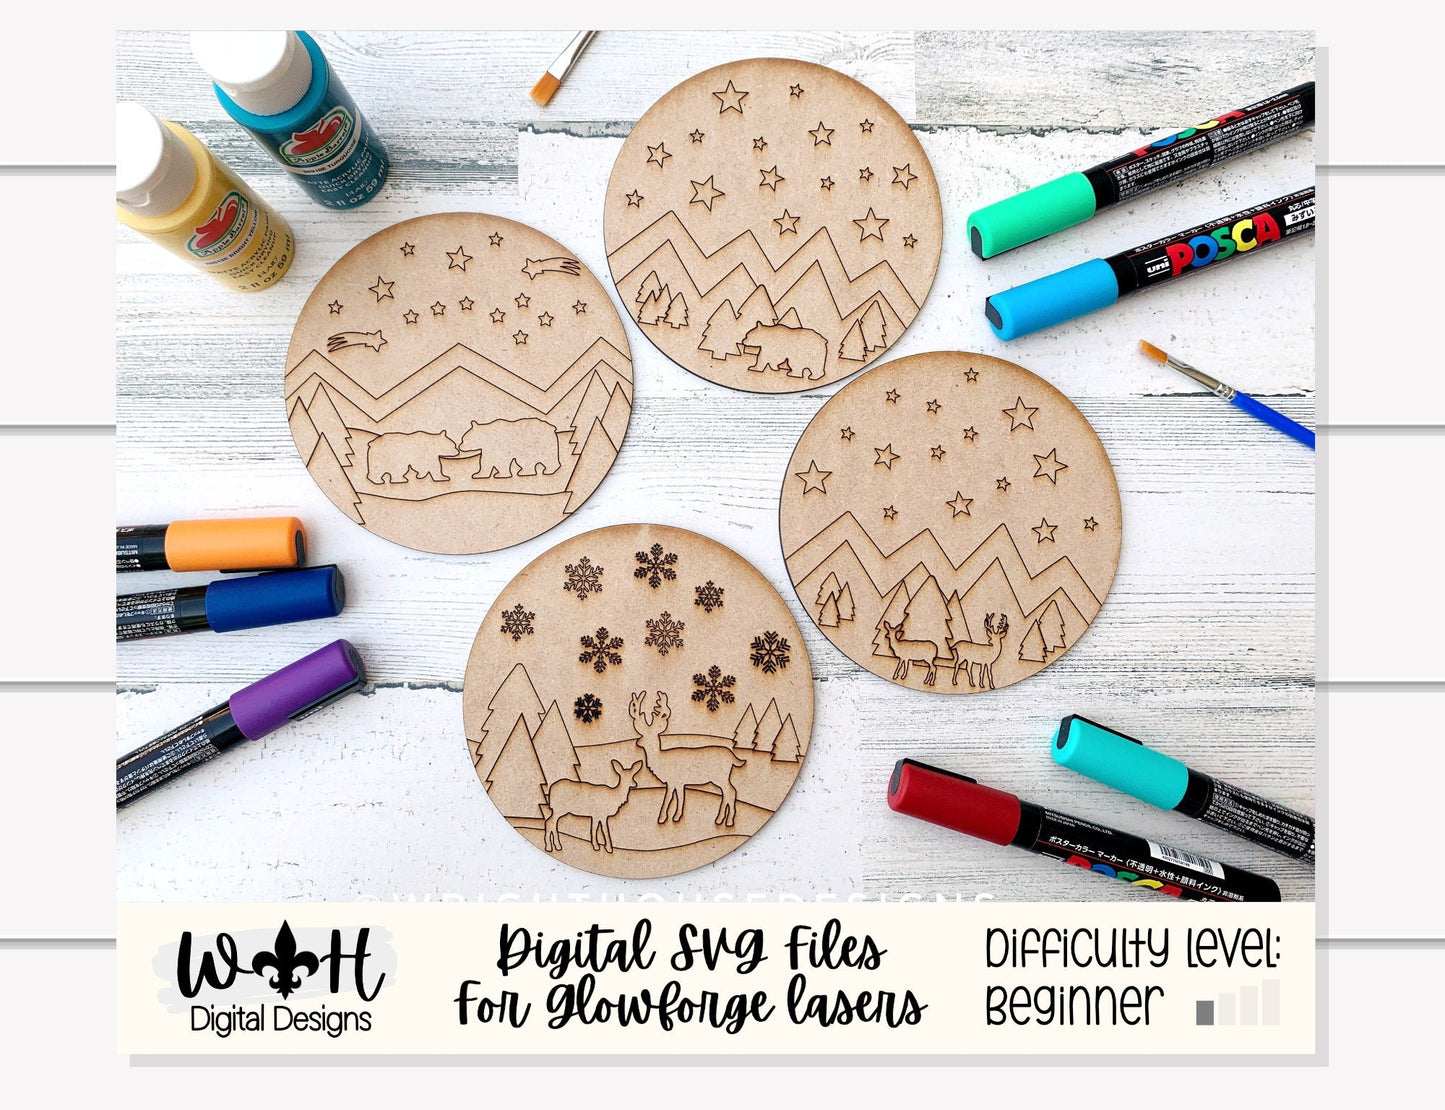 Winter Color Craft Bundle - Scoring Pattern Round For Diy Painting - Files for Sign Making - SVG Cut File For Glowforge - Digital File